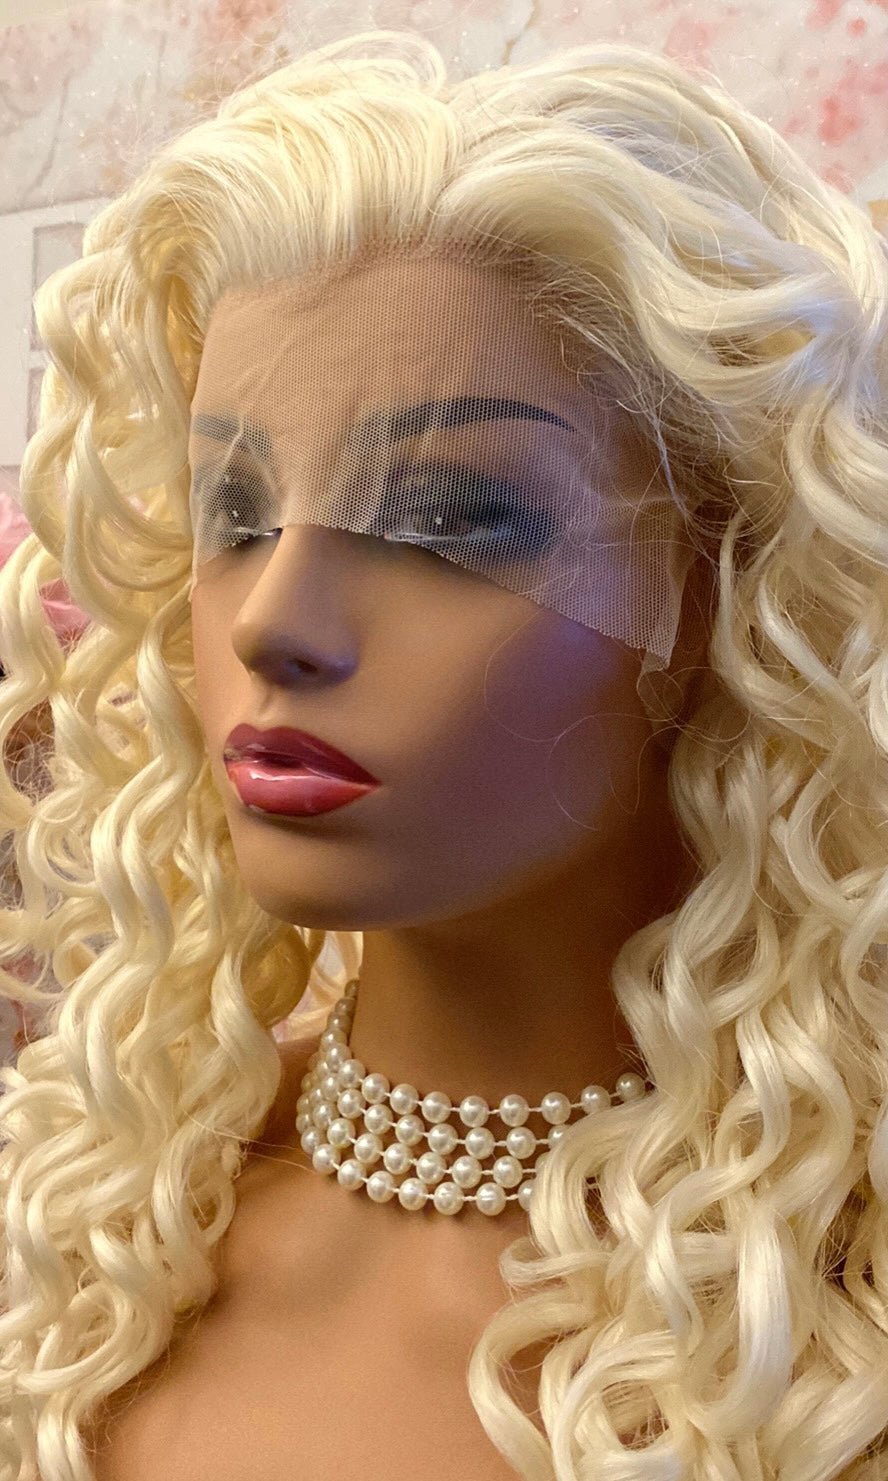 Cosmetology Mannequin Head with Human Hair, Premium Nigeria